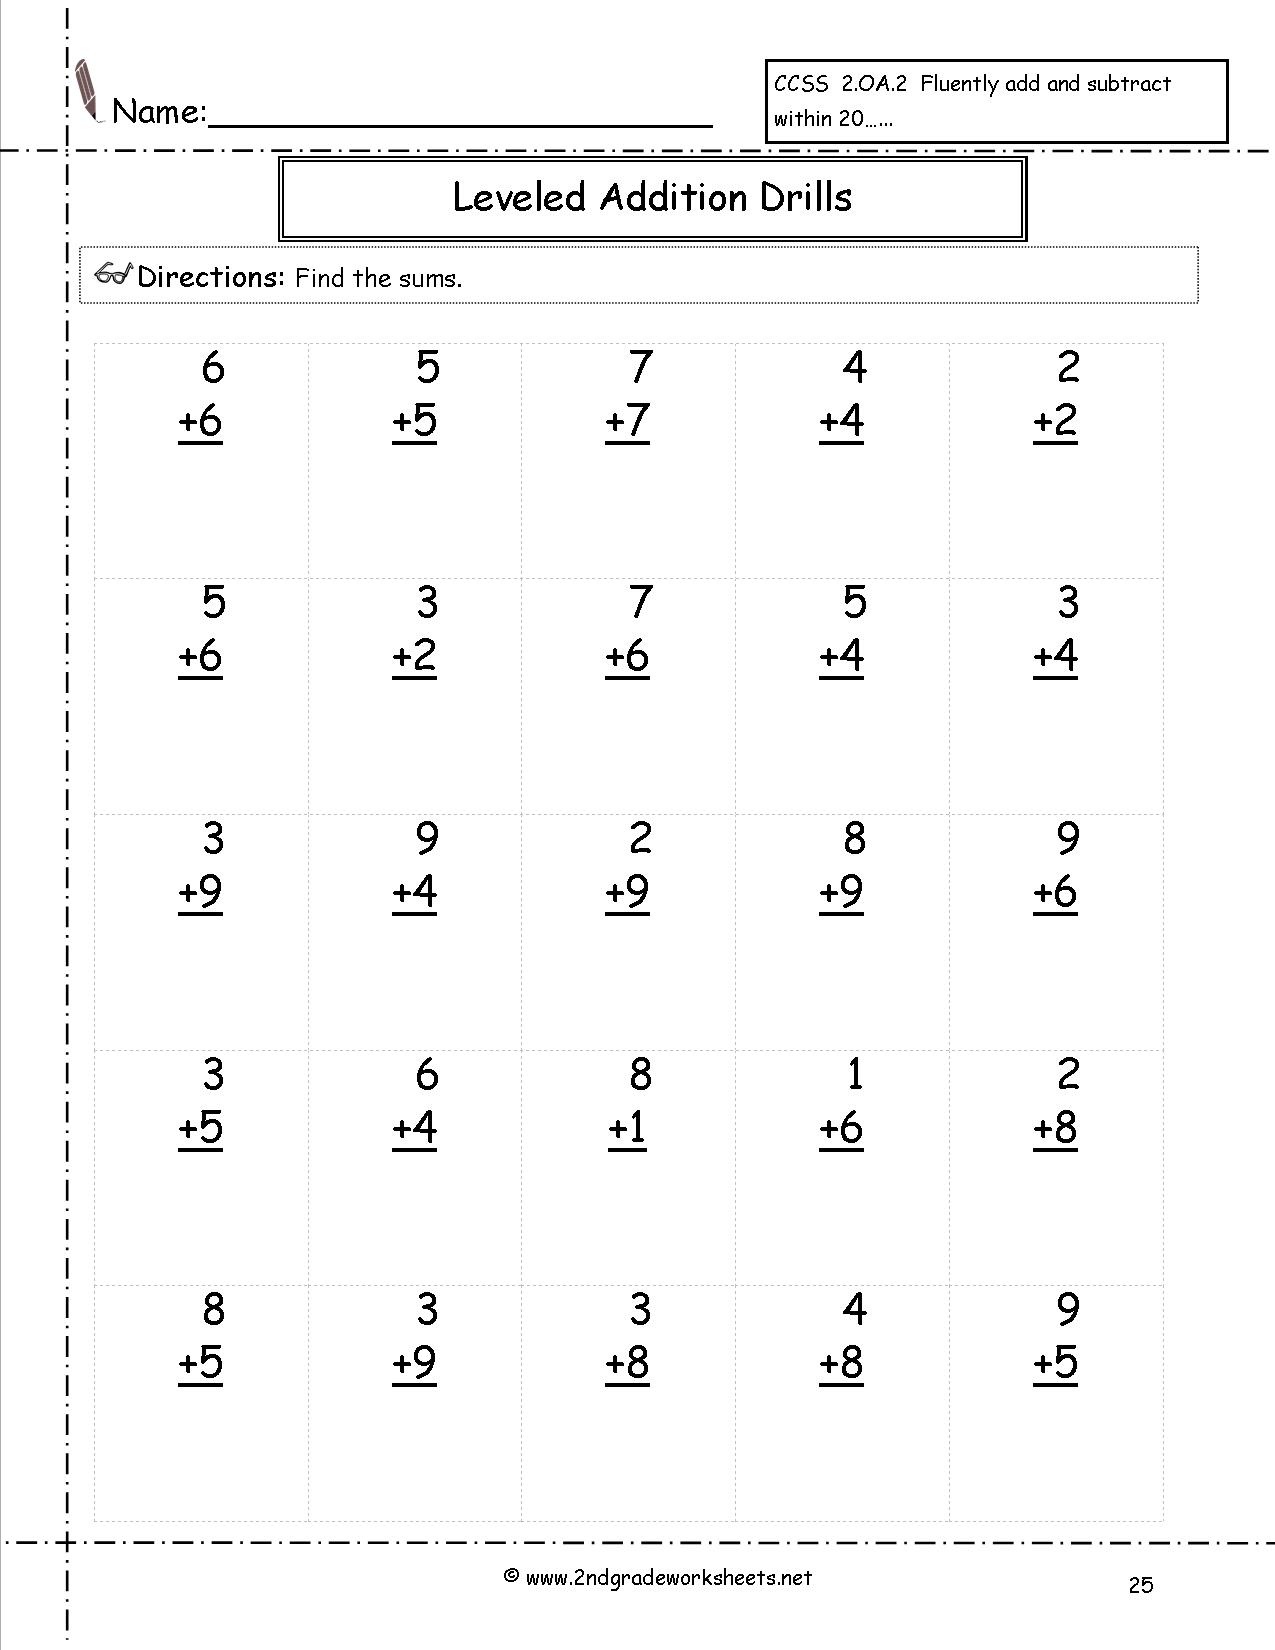 Free Math Worksheets And Printouts - Free Printable Subtraction Worksheets For 2Nd Grade